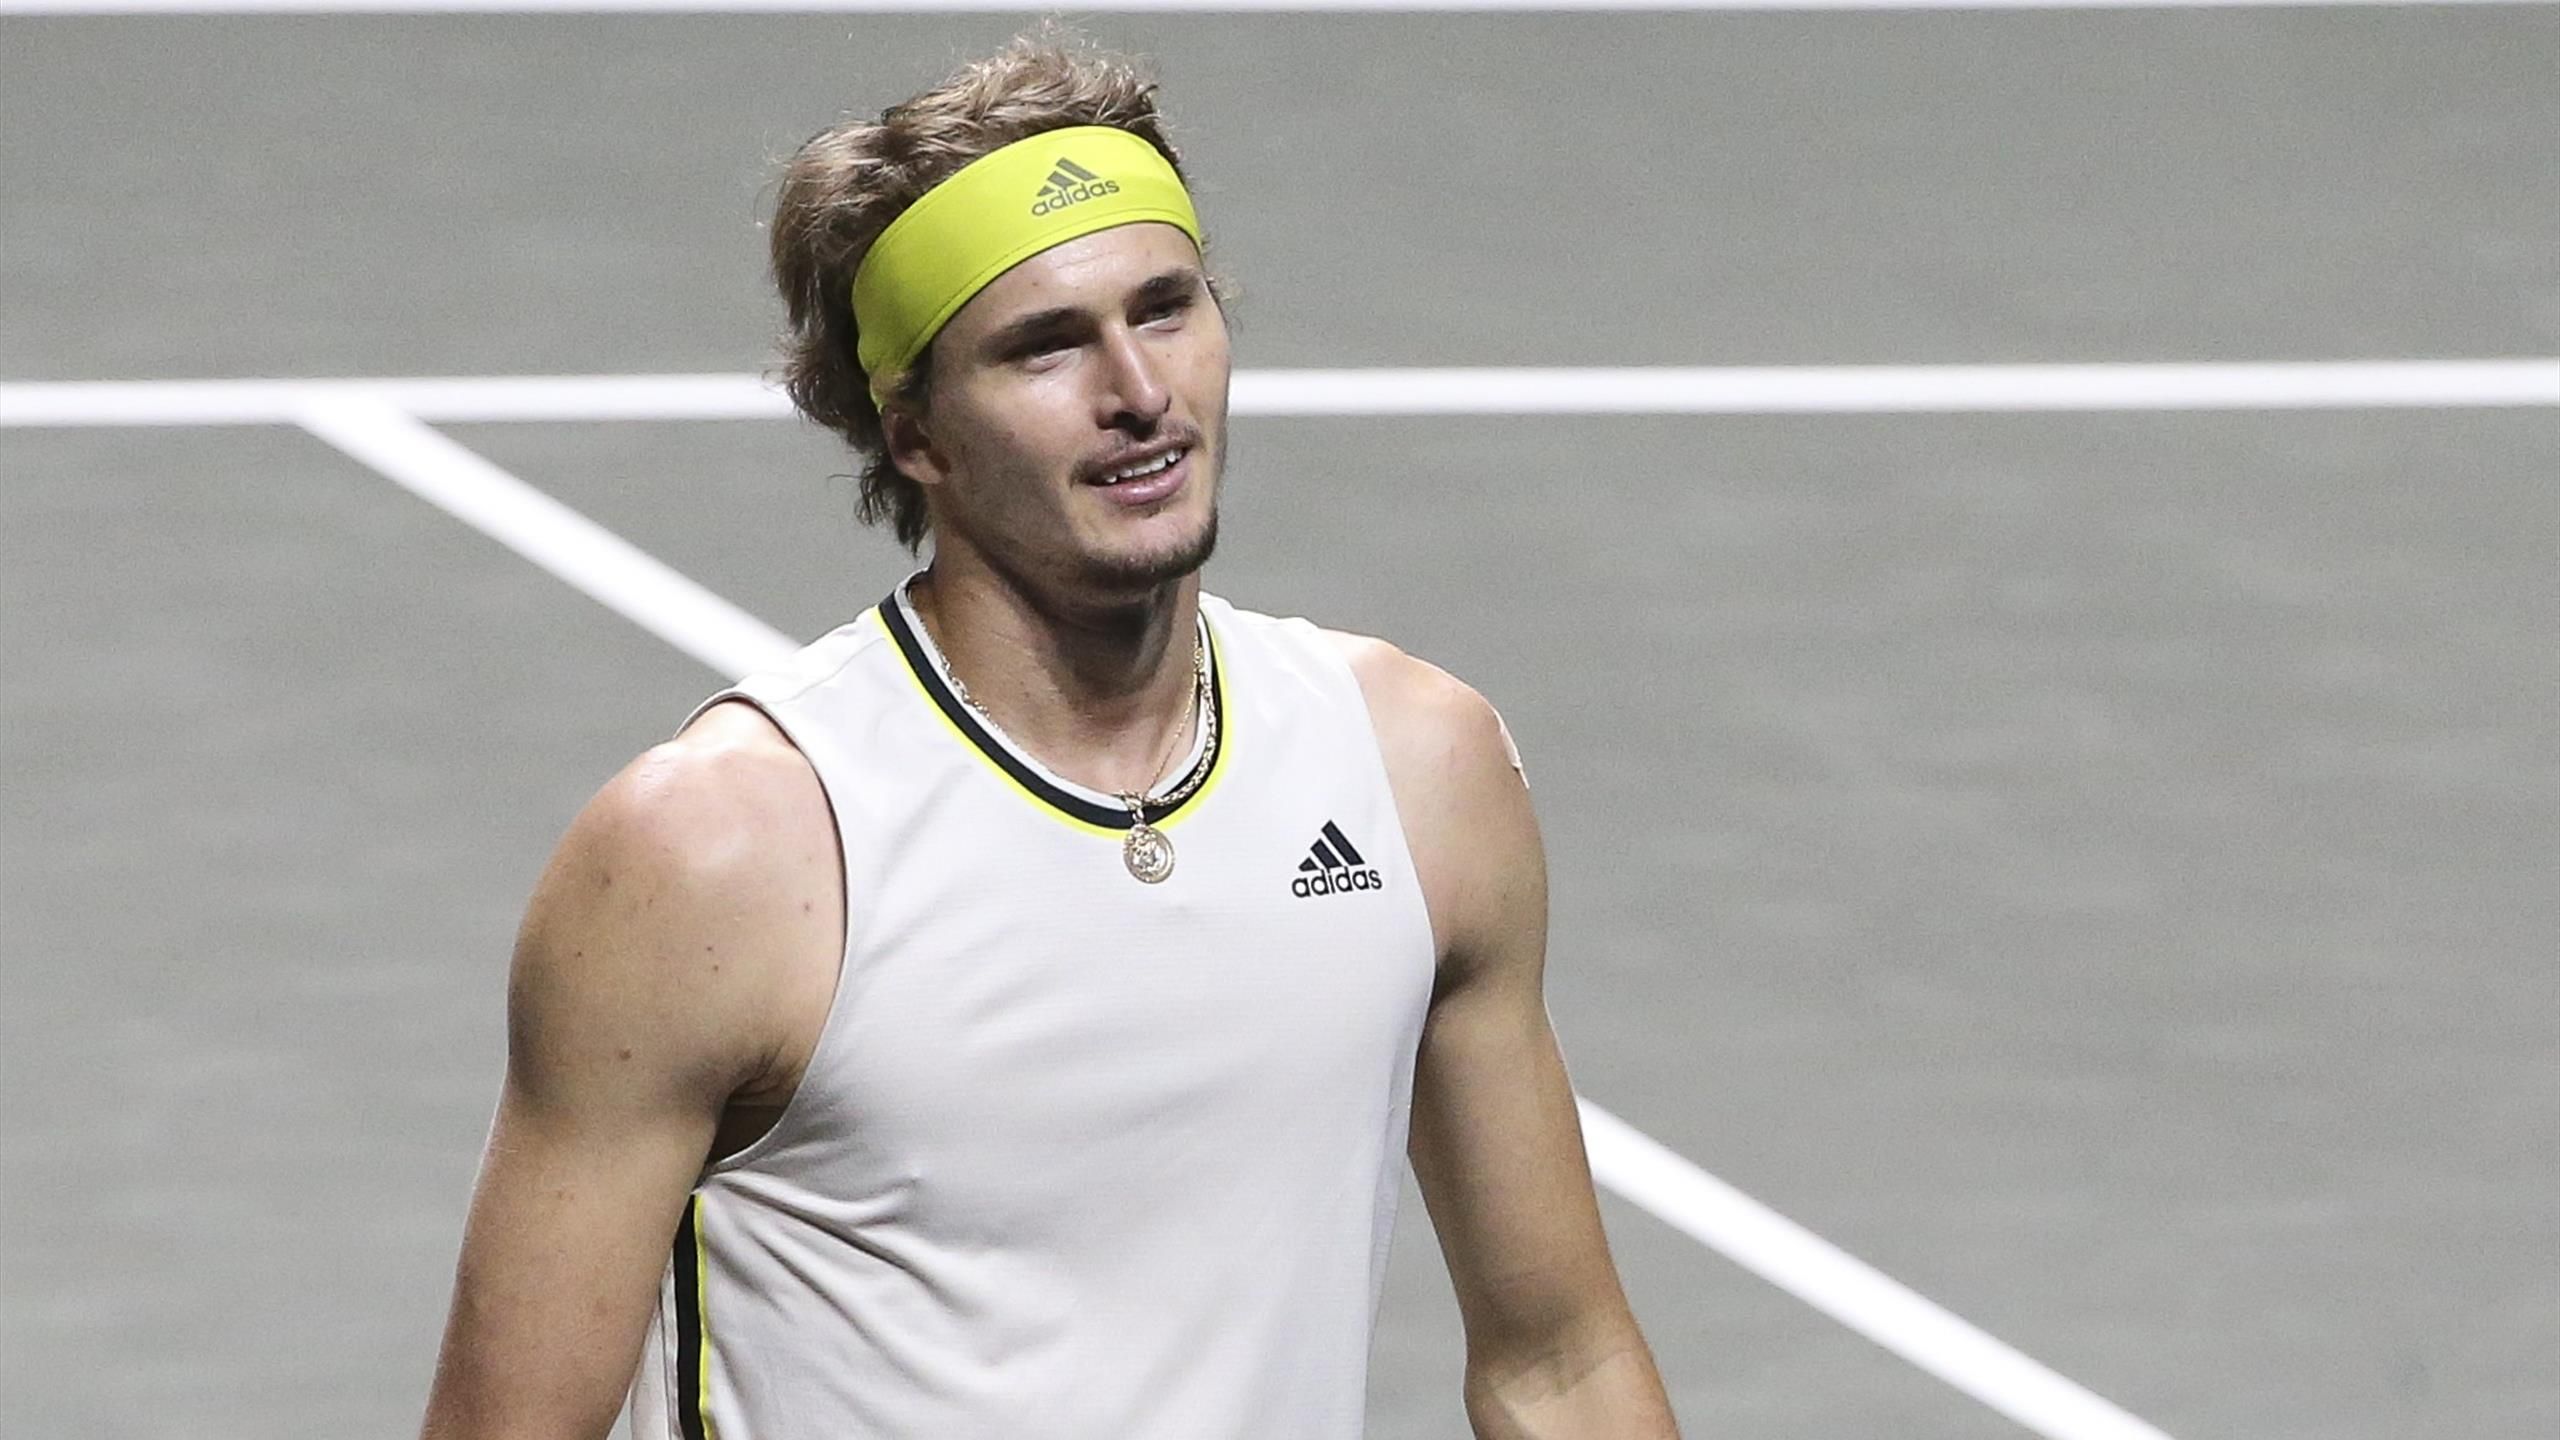 Its a disaster - Alexander Zverev hits out at ATP rankings for having him below Roger Federer